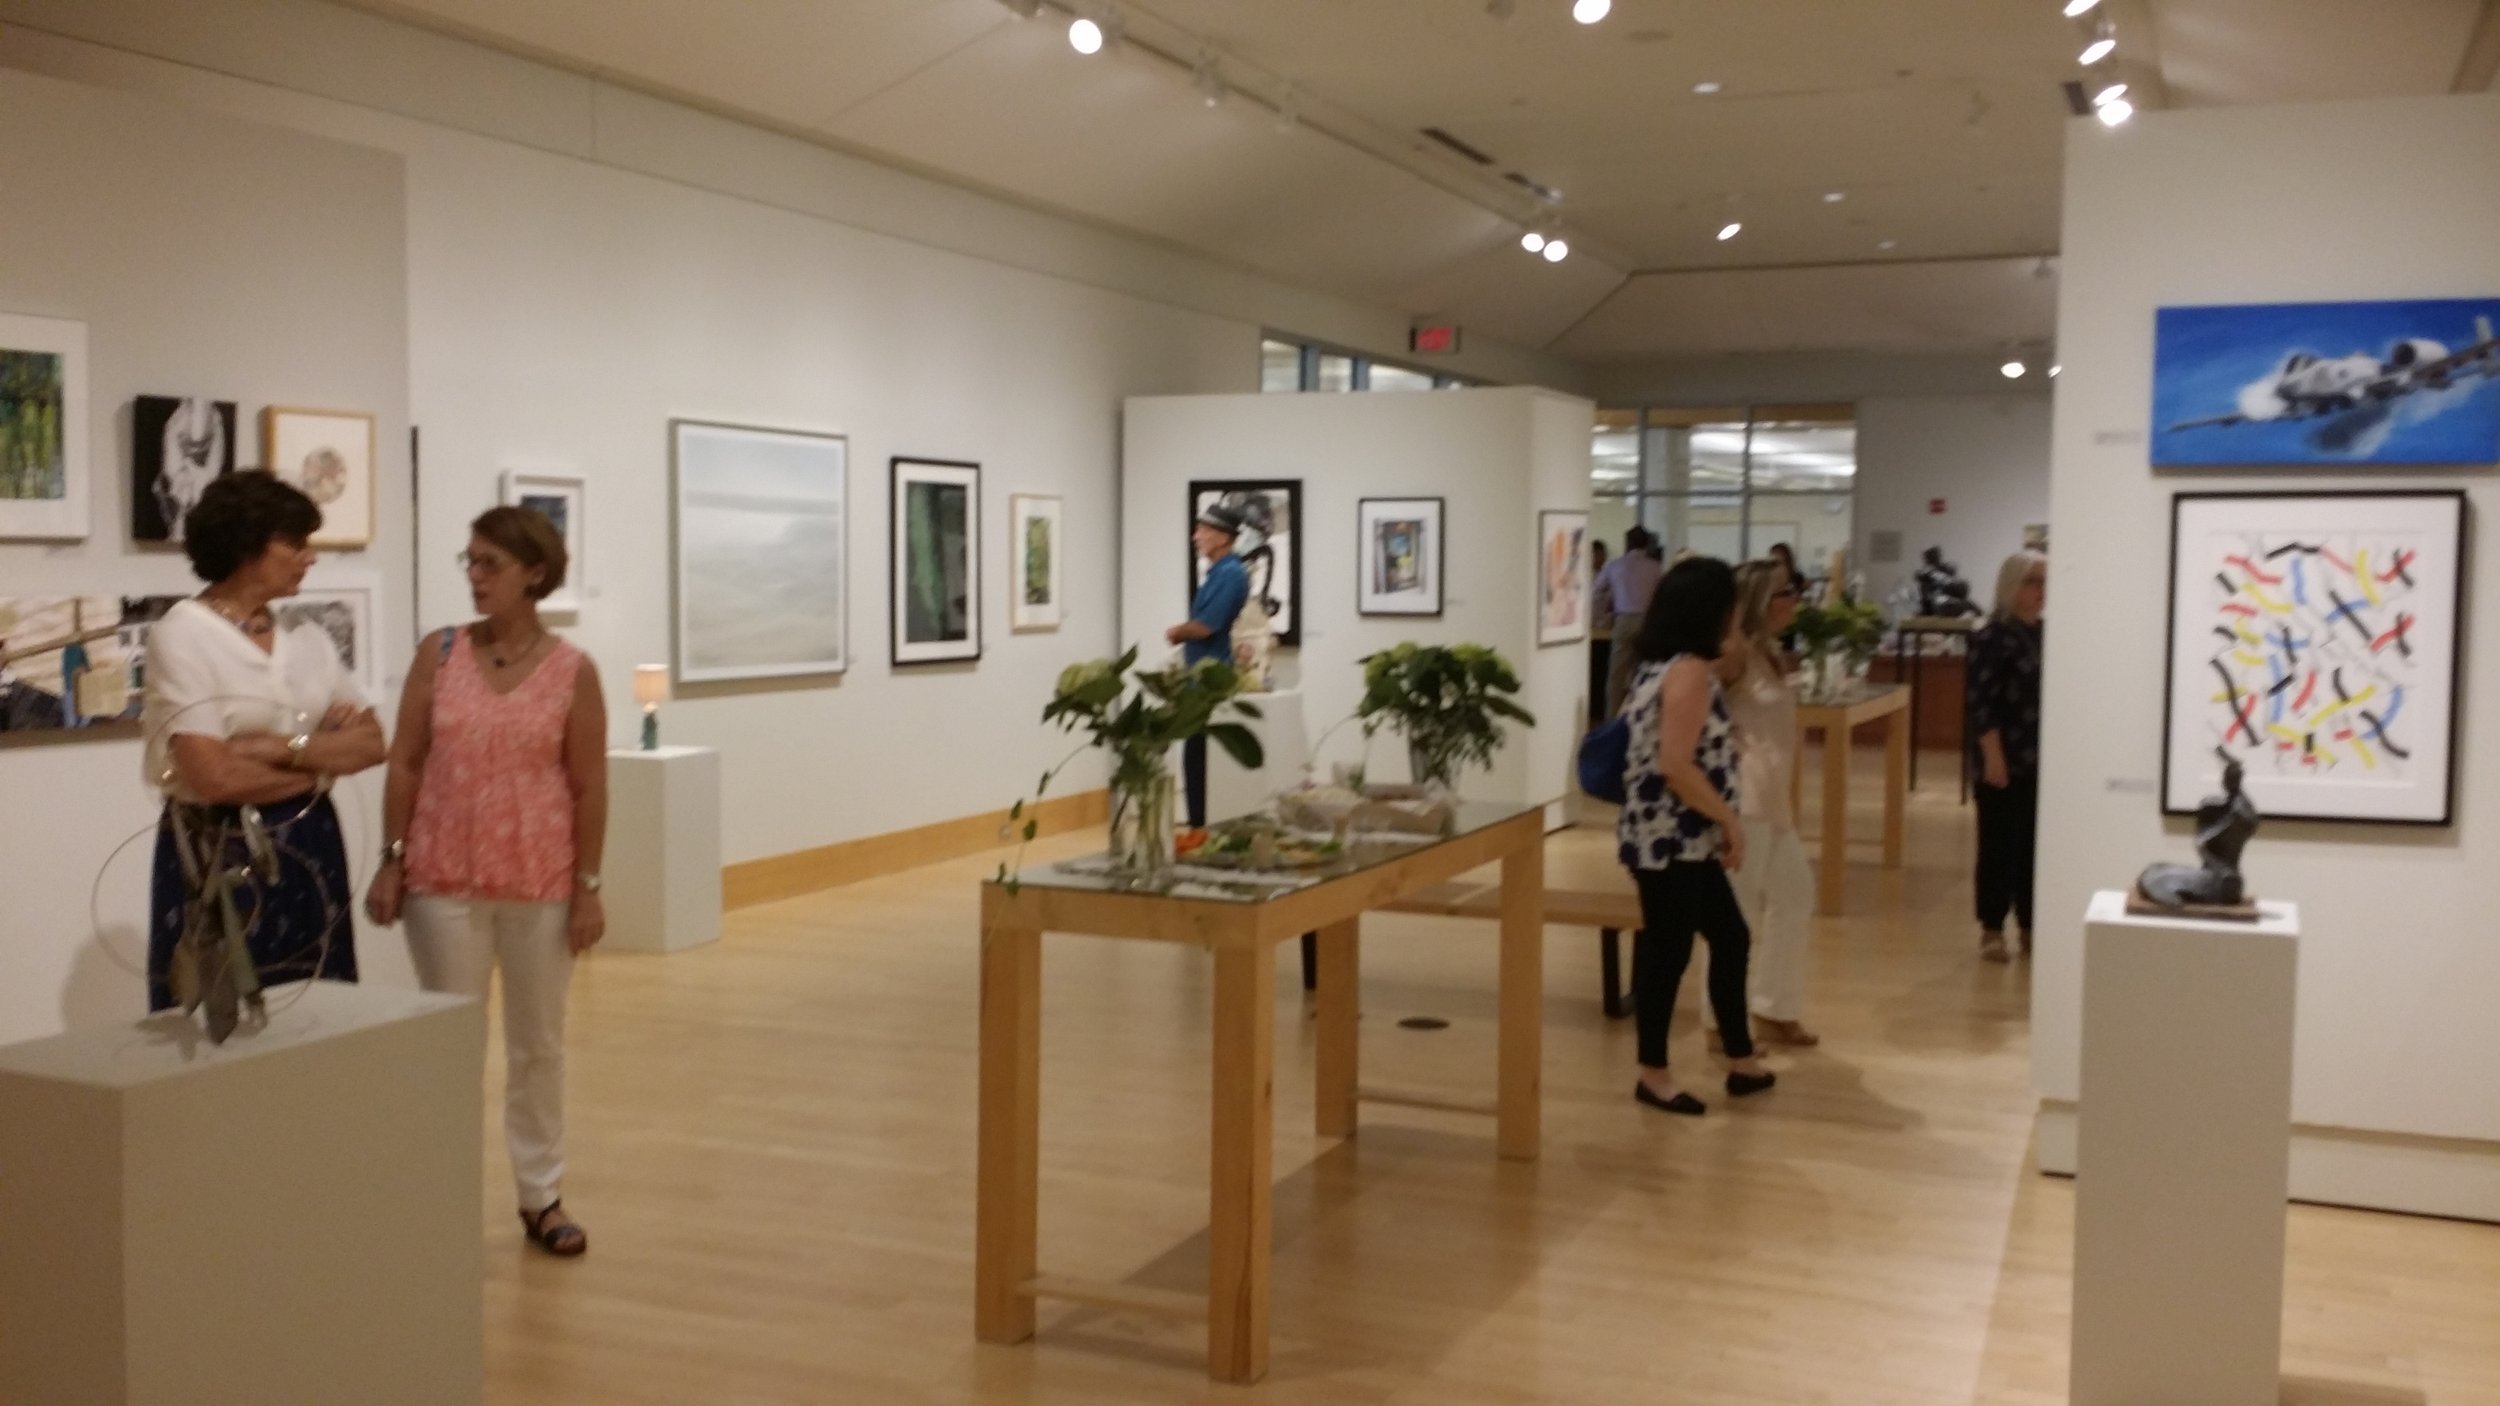   Flinn Summer Show July 31 - August 22    Call For Entry   Entry May 20 - June 30     Learn More and Enter   